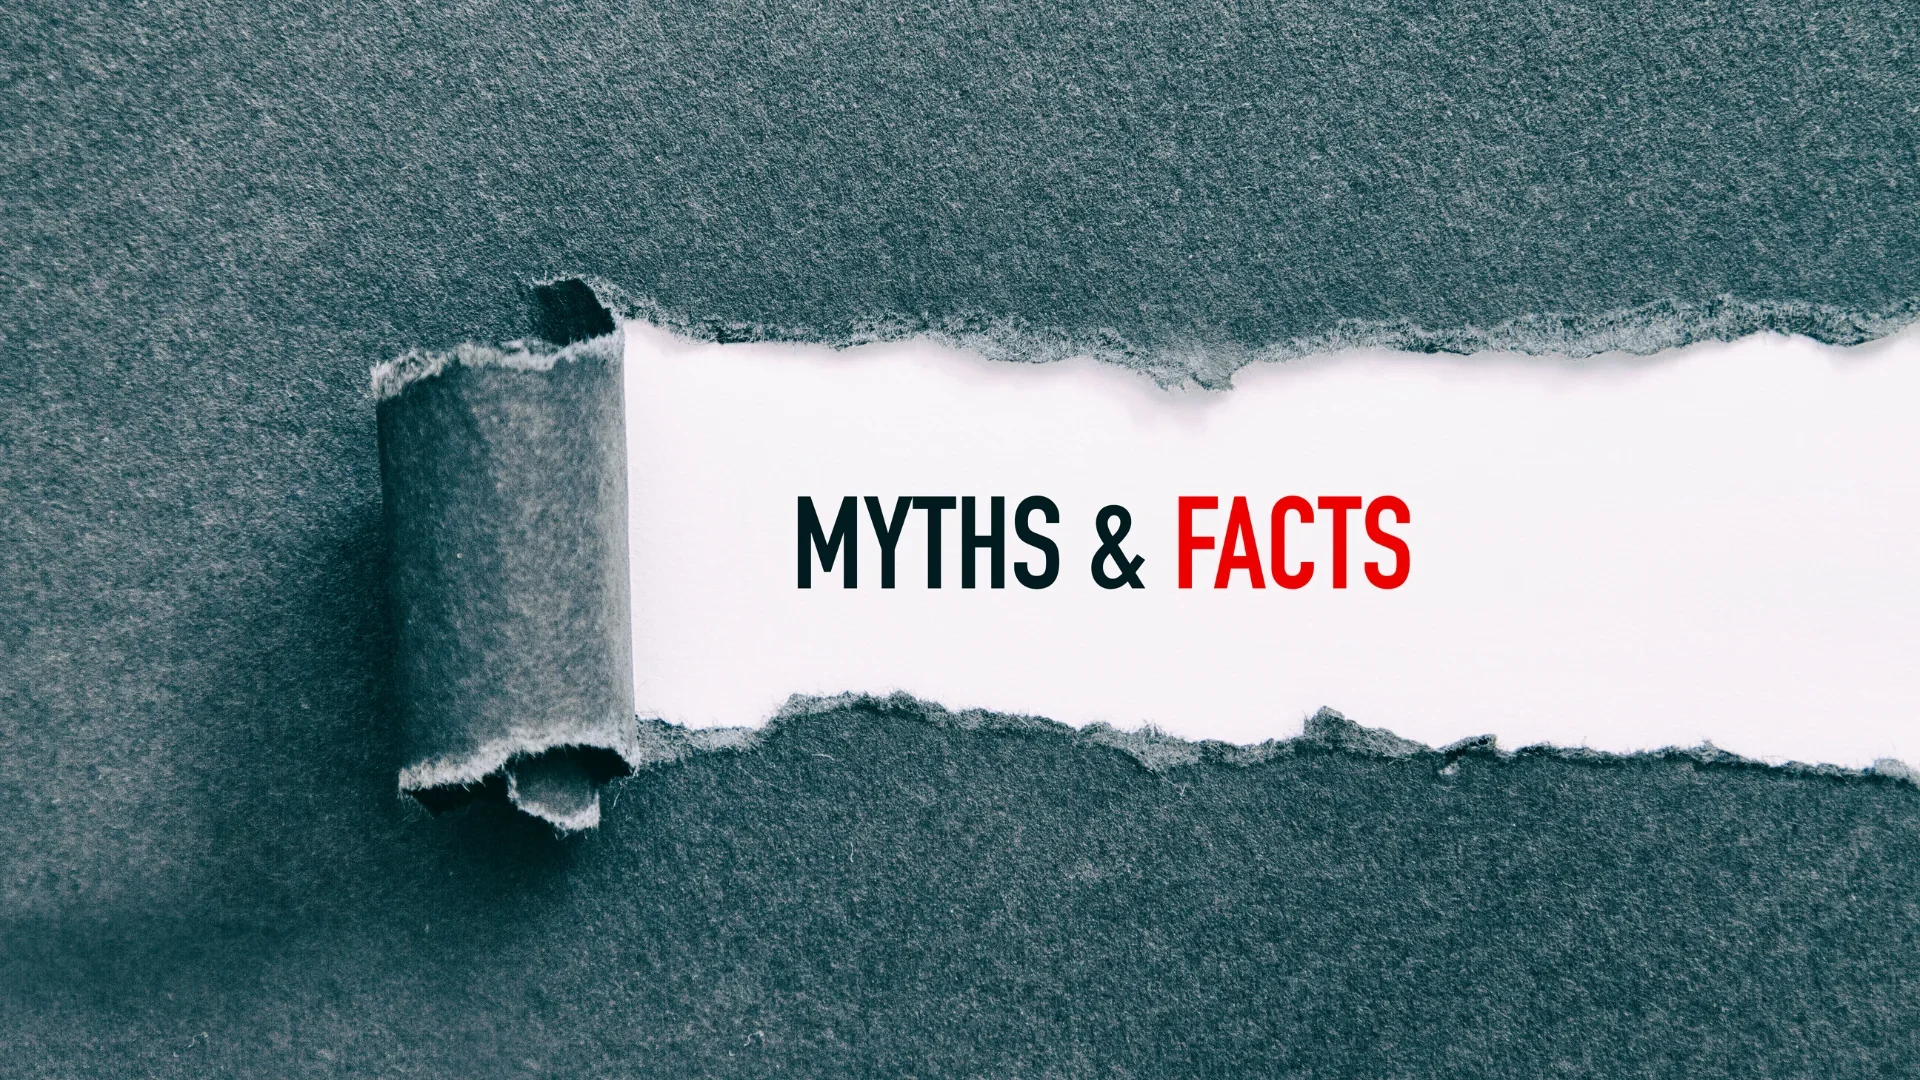 The Top Marketing Myths Debunked